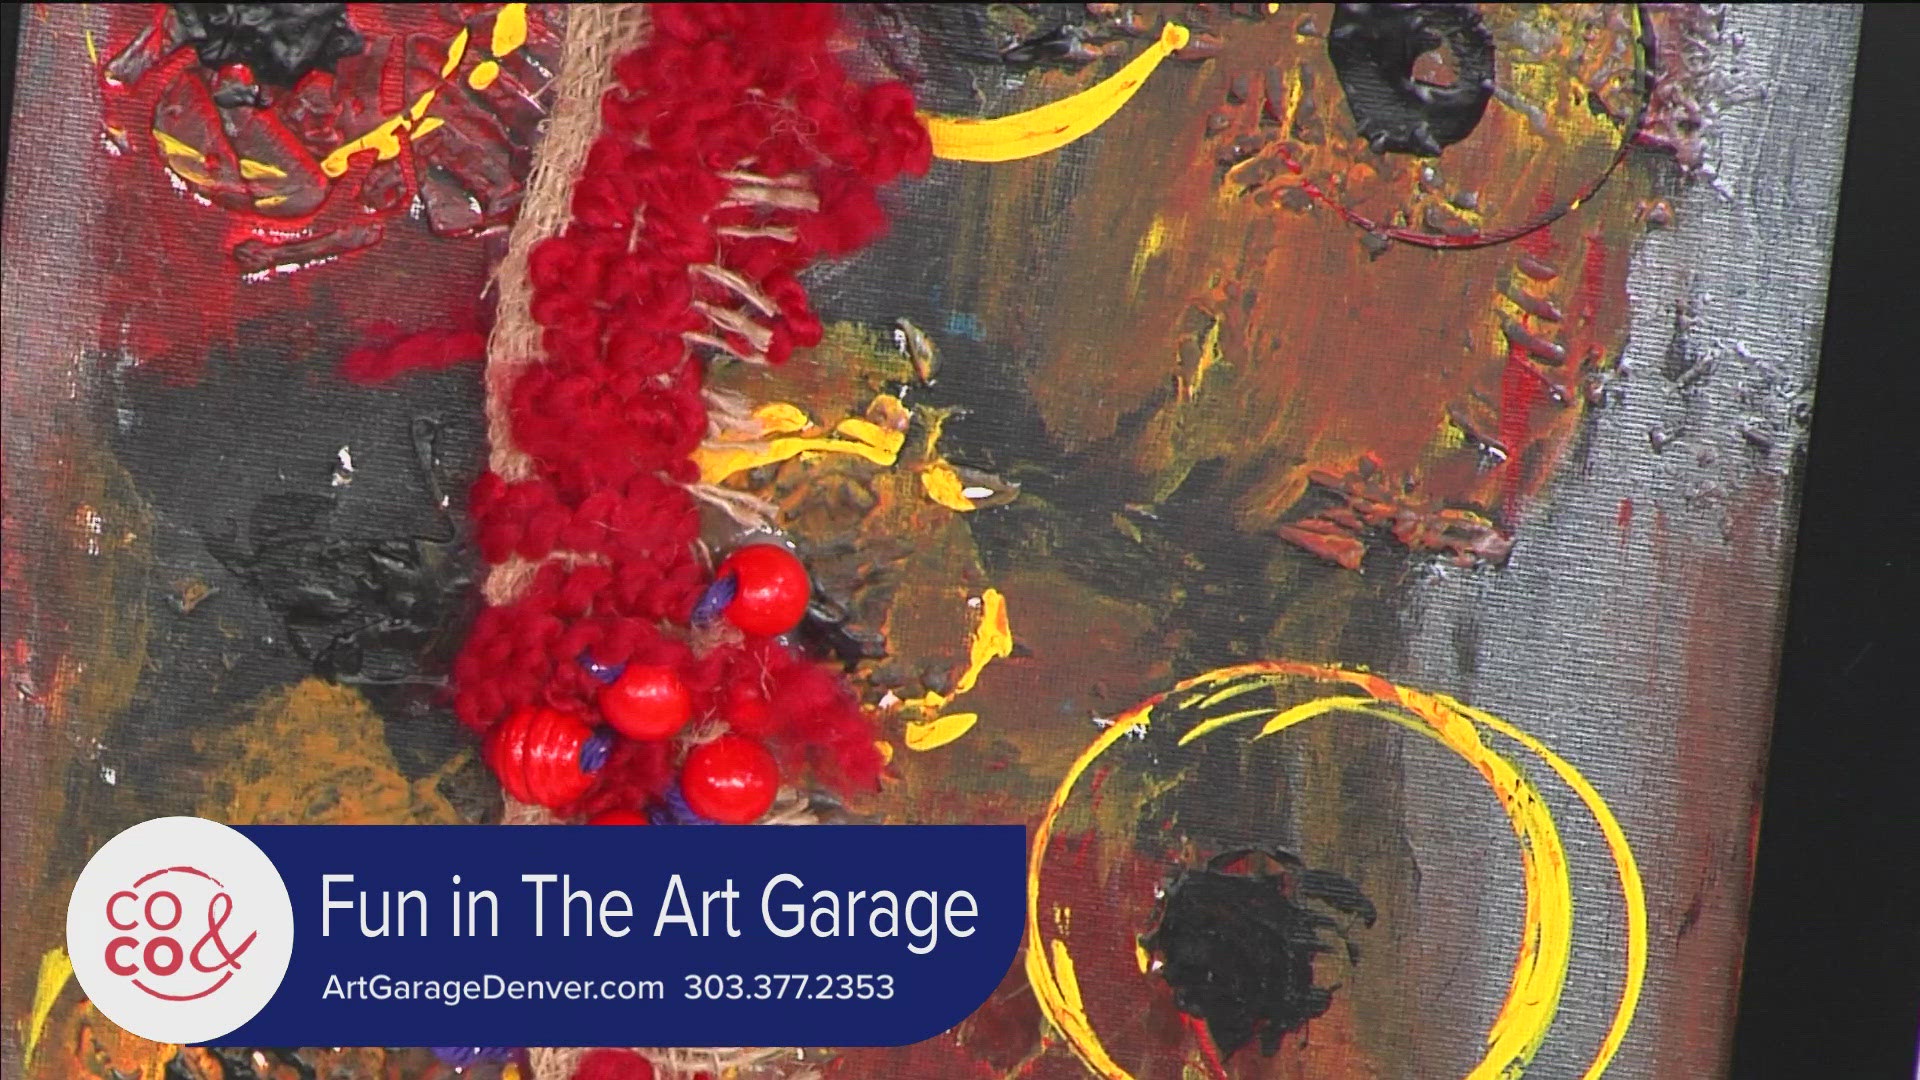 The Art Garage's mission is to offer arts-based programs to promote creativity for people of all ages. Learn more at ArtGarageDenver.com.